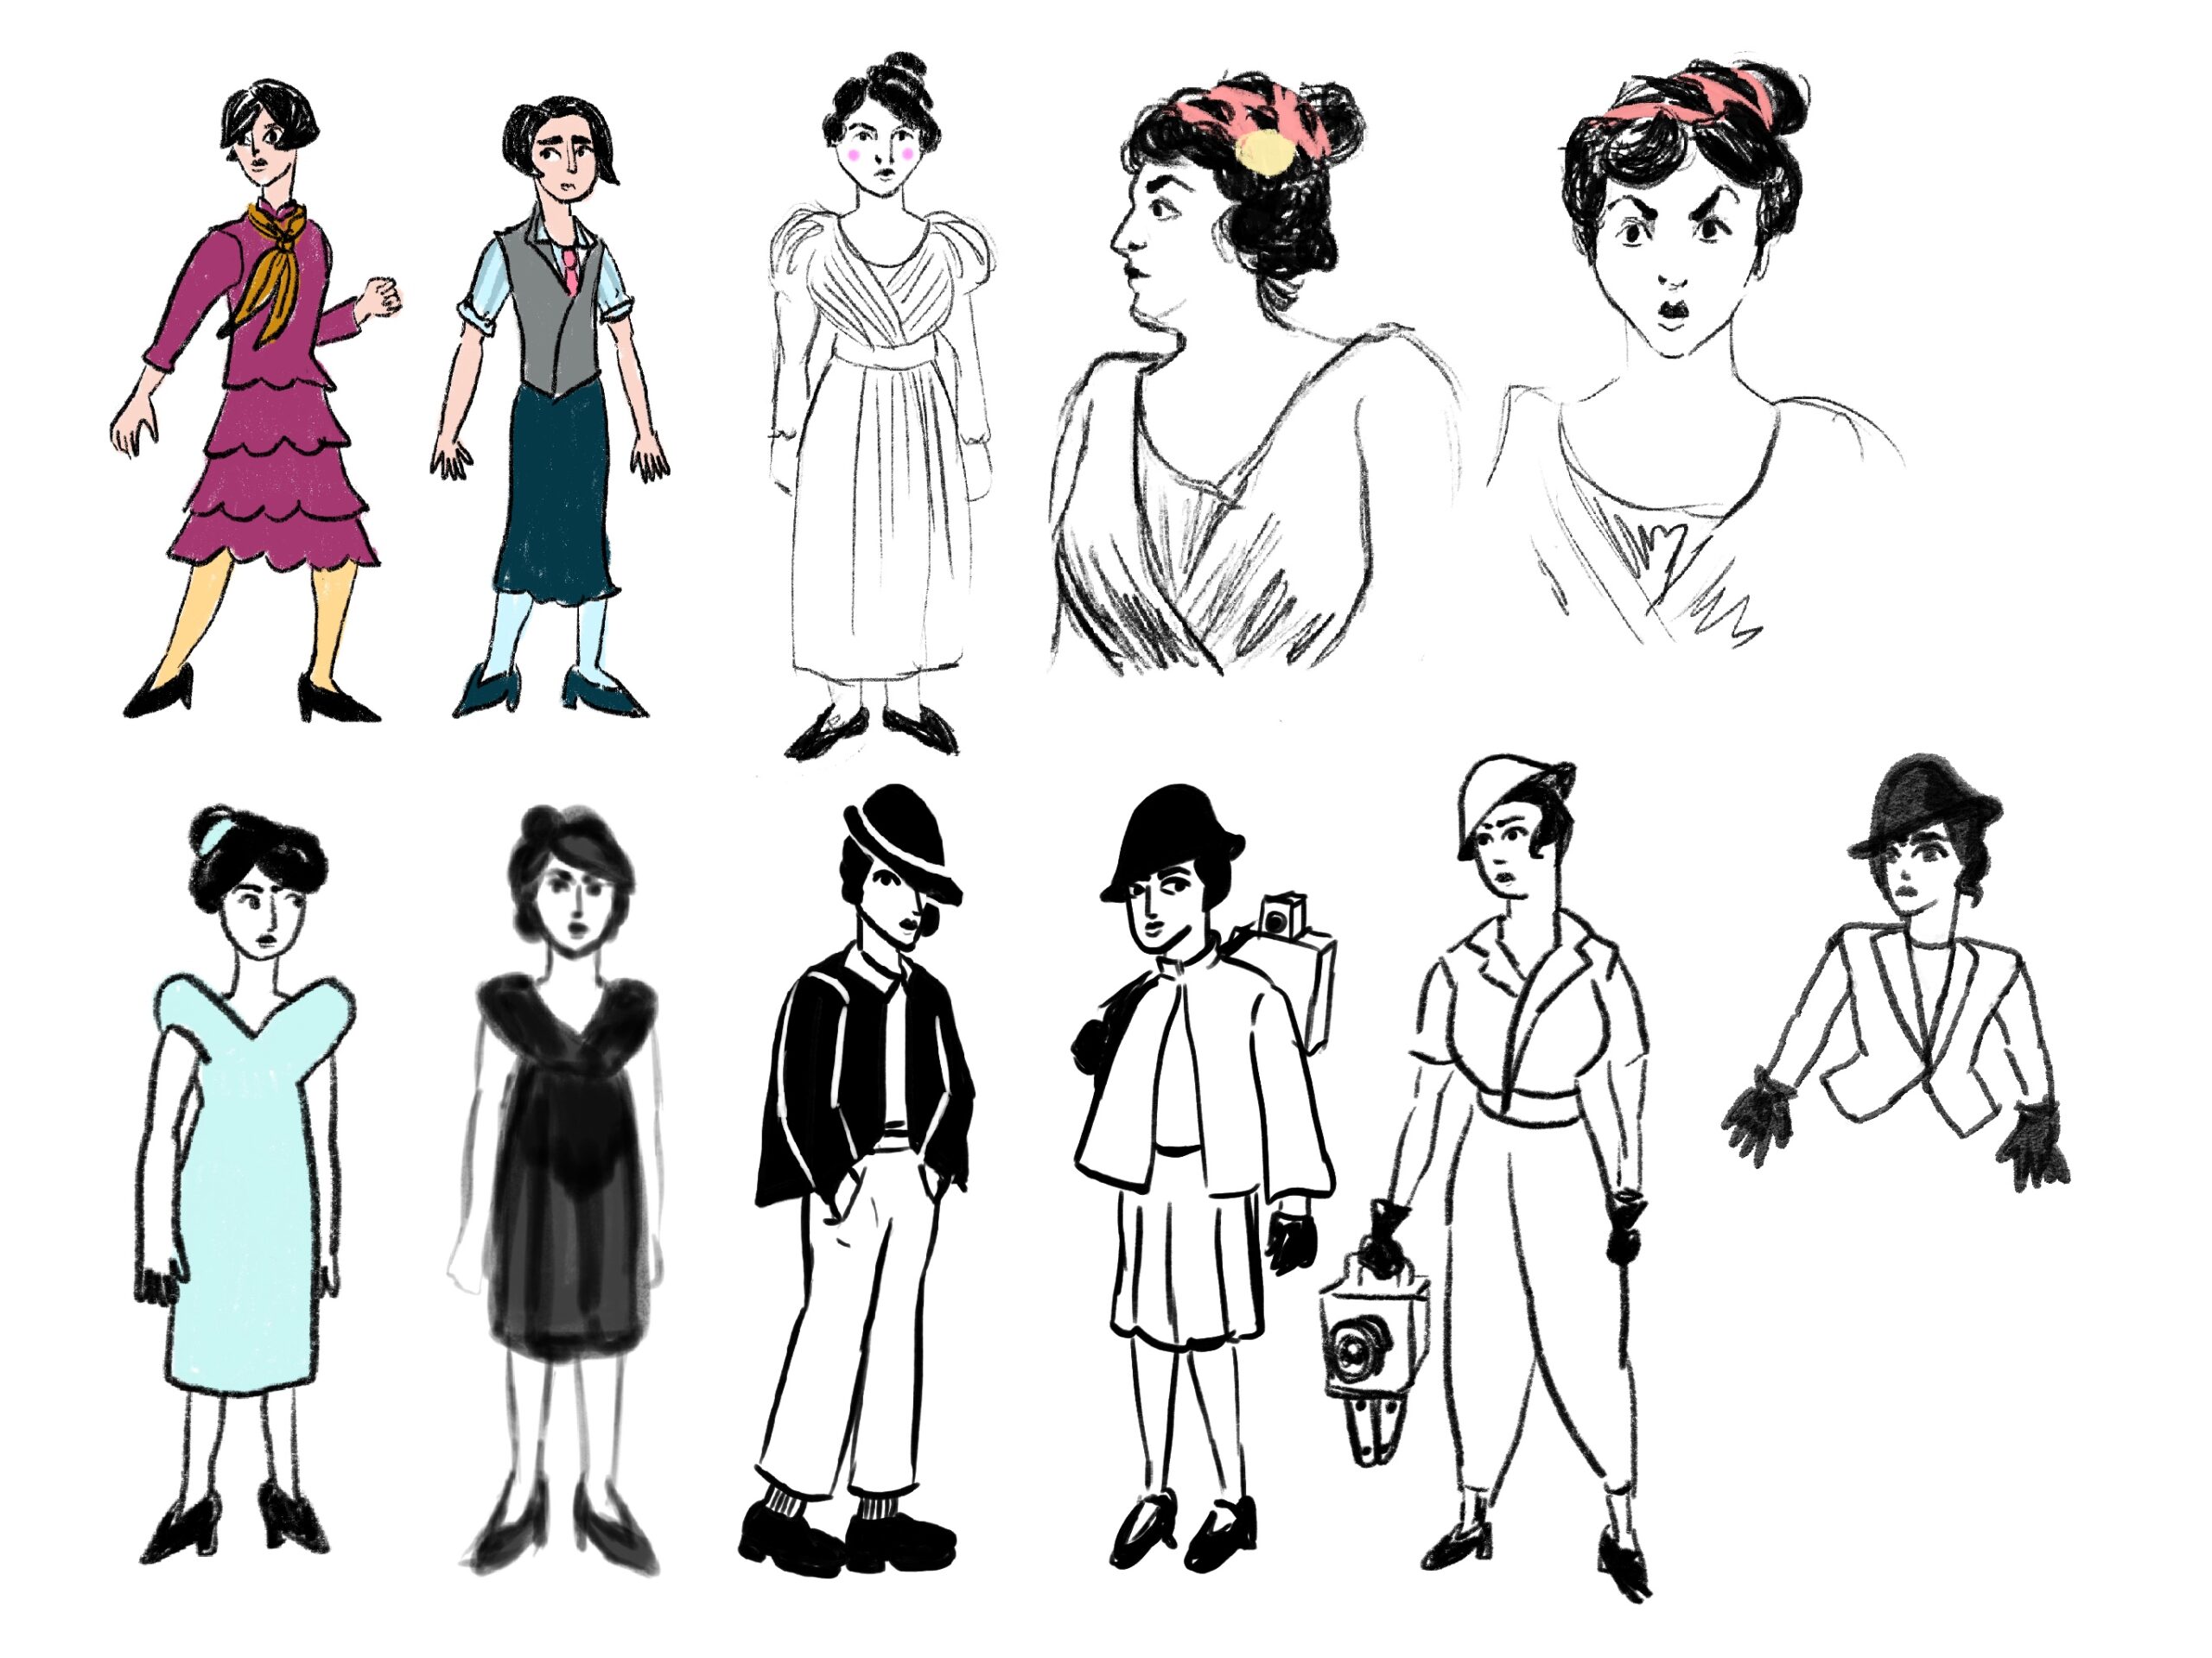 Georgette chara design early sketches by Jean-Rémi